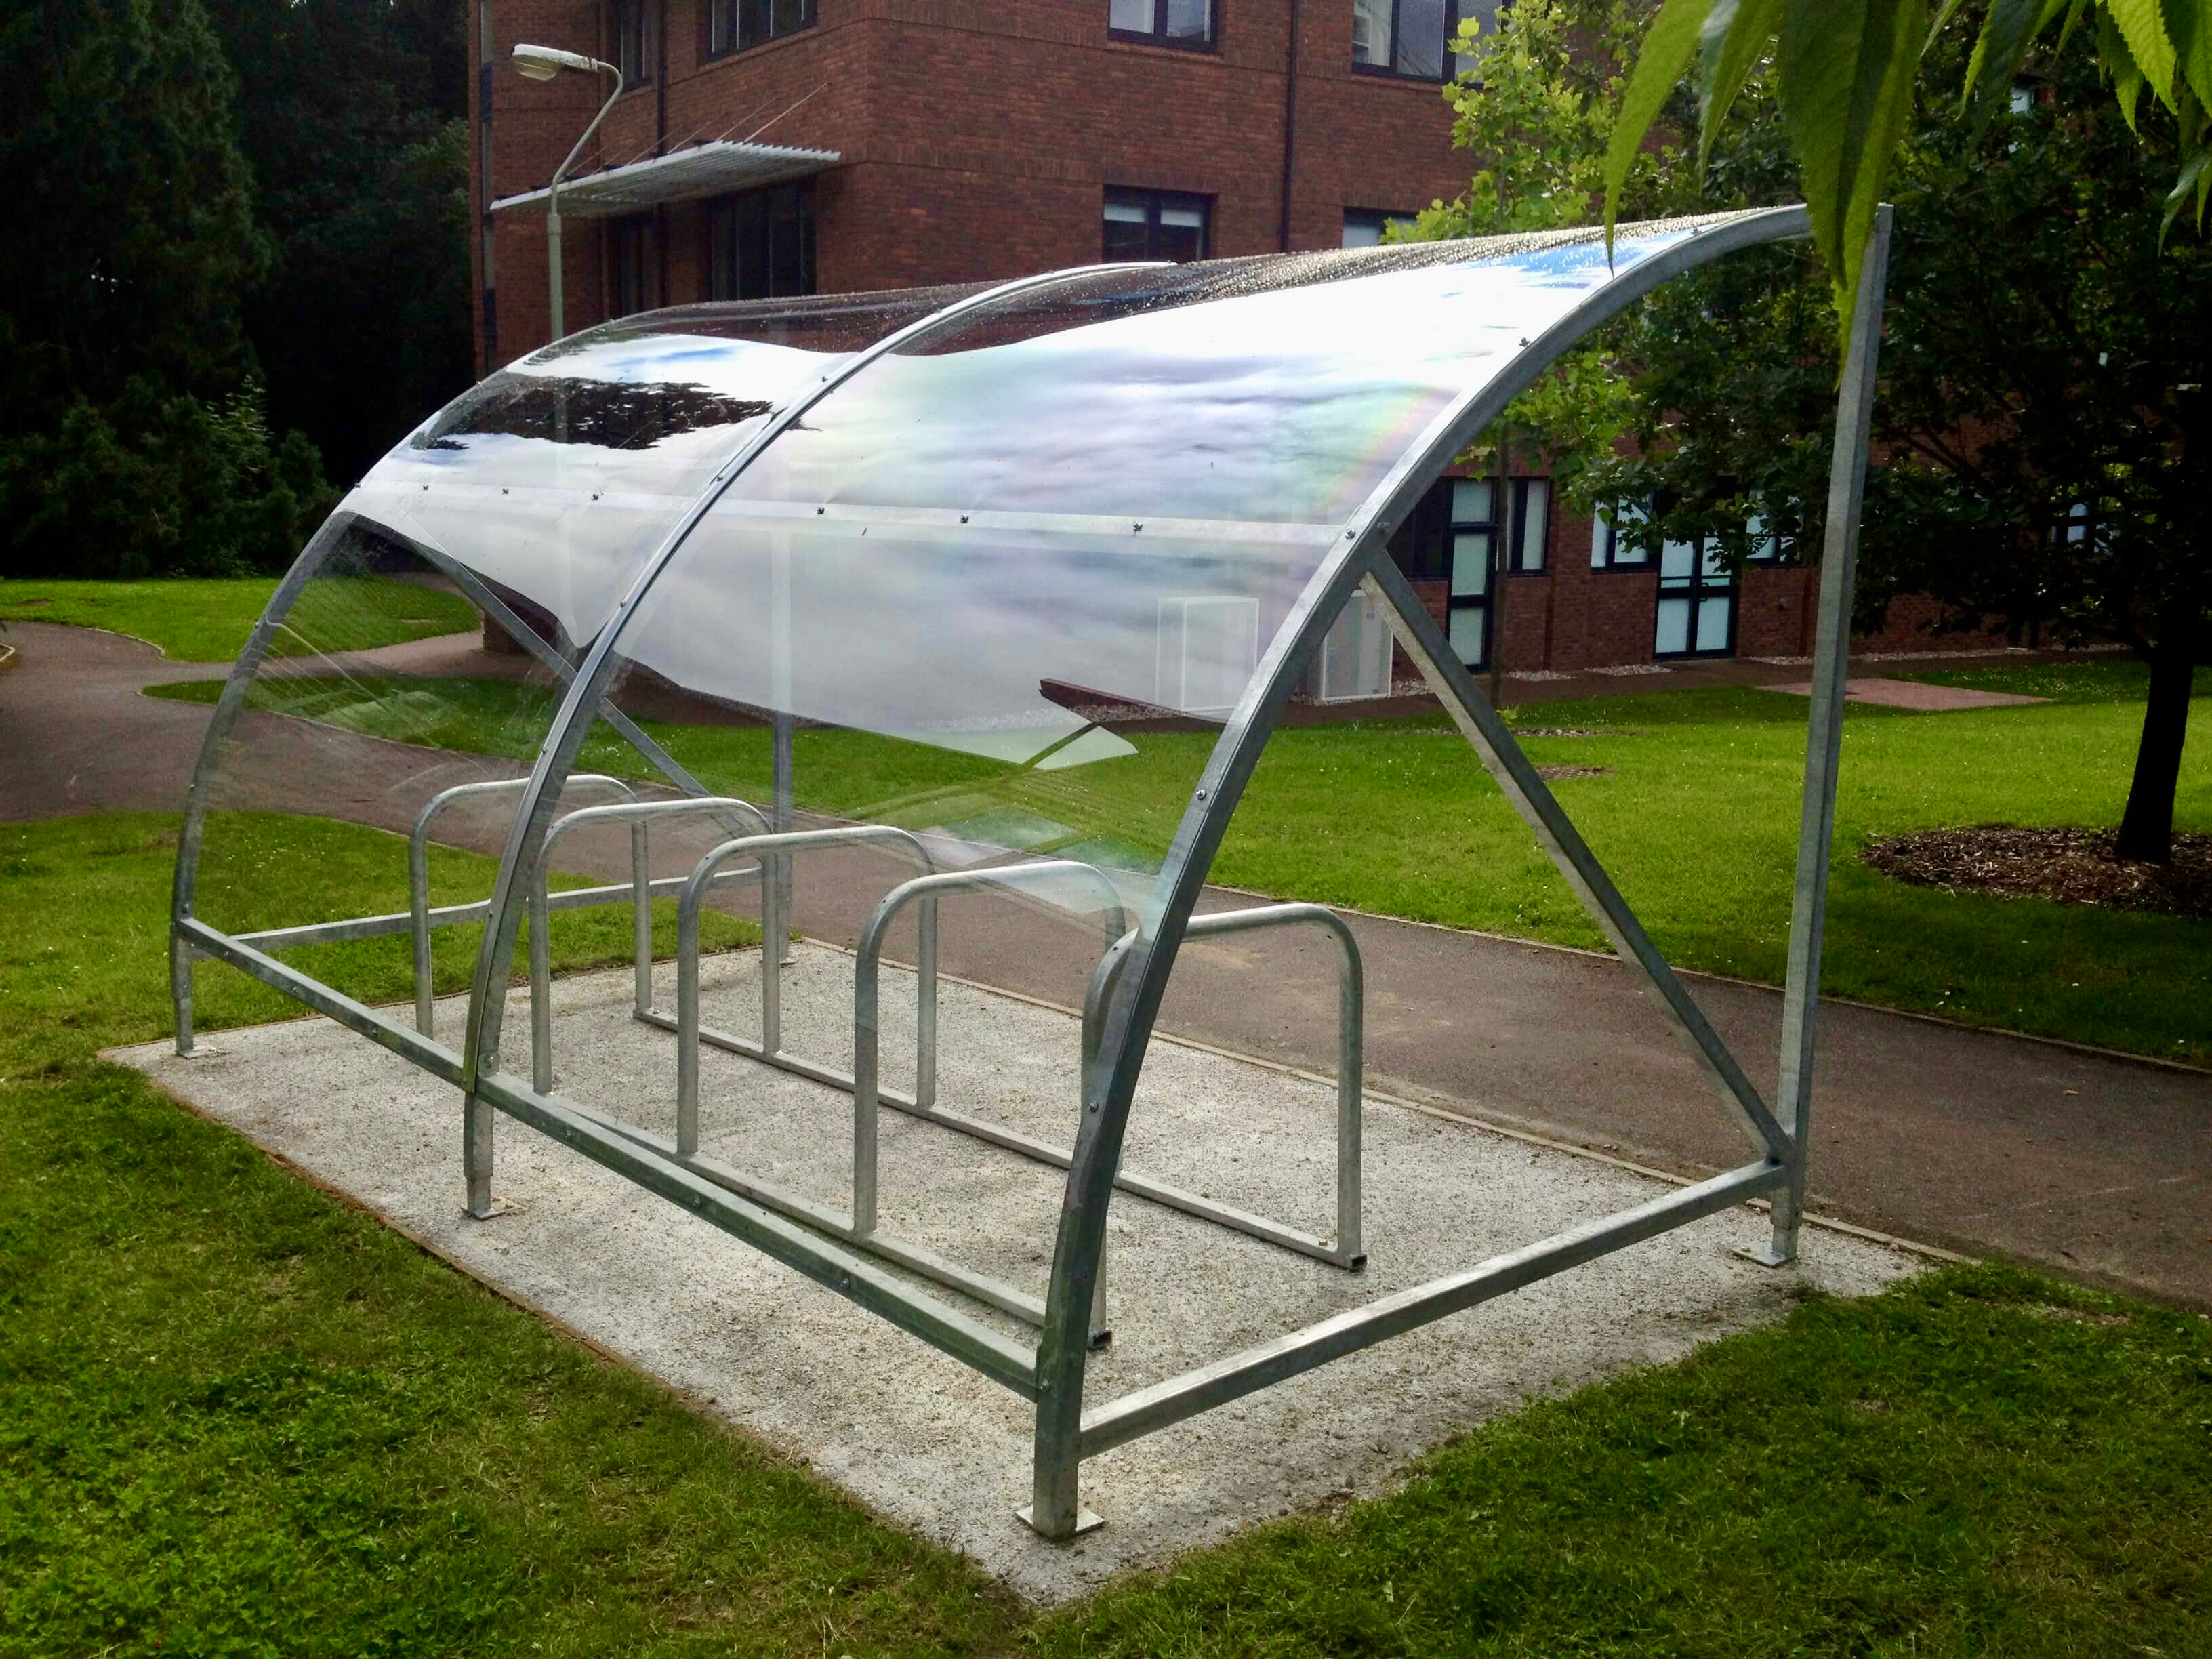 10 space original cycle shelter with toastrack cycle rack